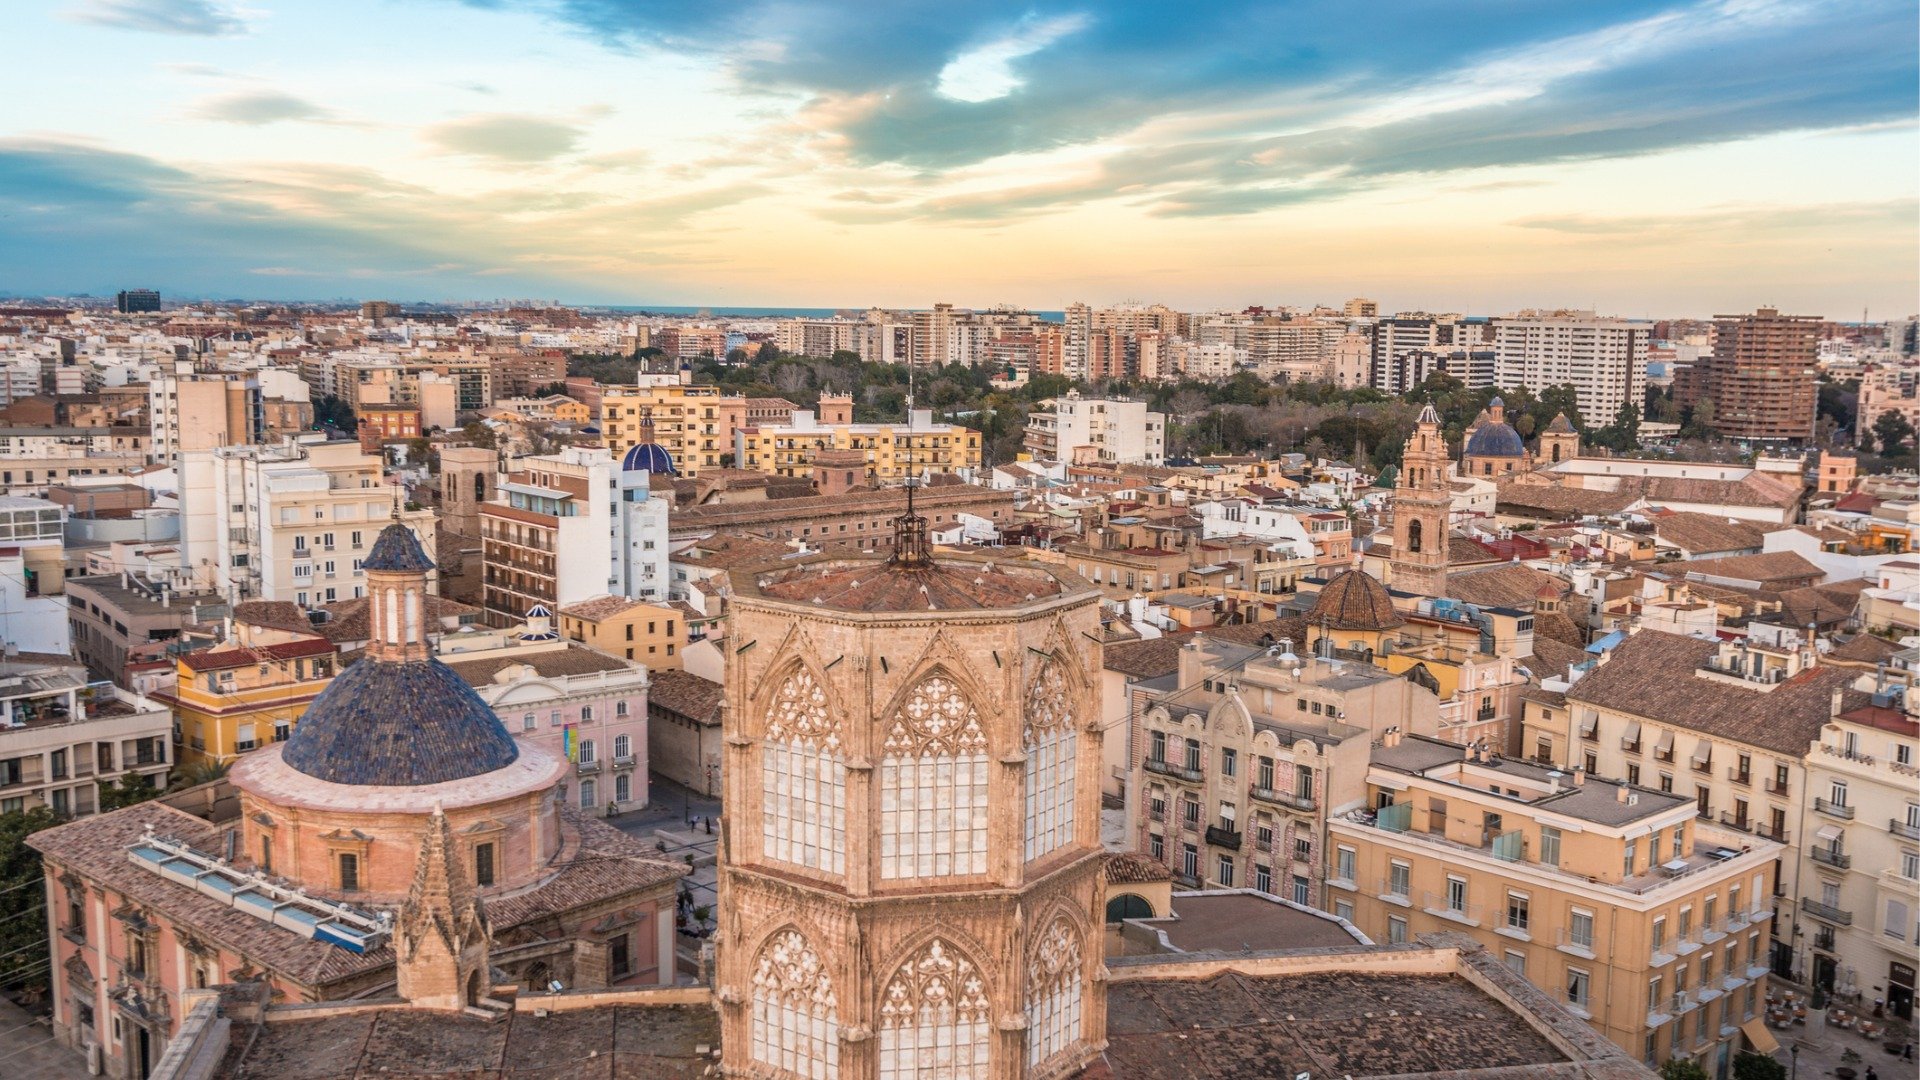 Sunset skyline of Valencia, one of the best places to visit in Spain. 